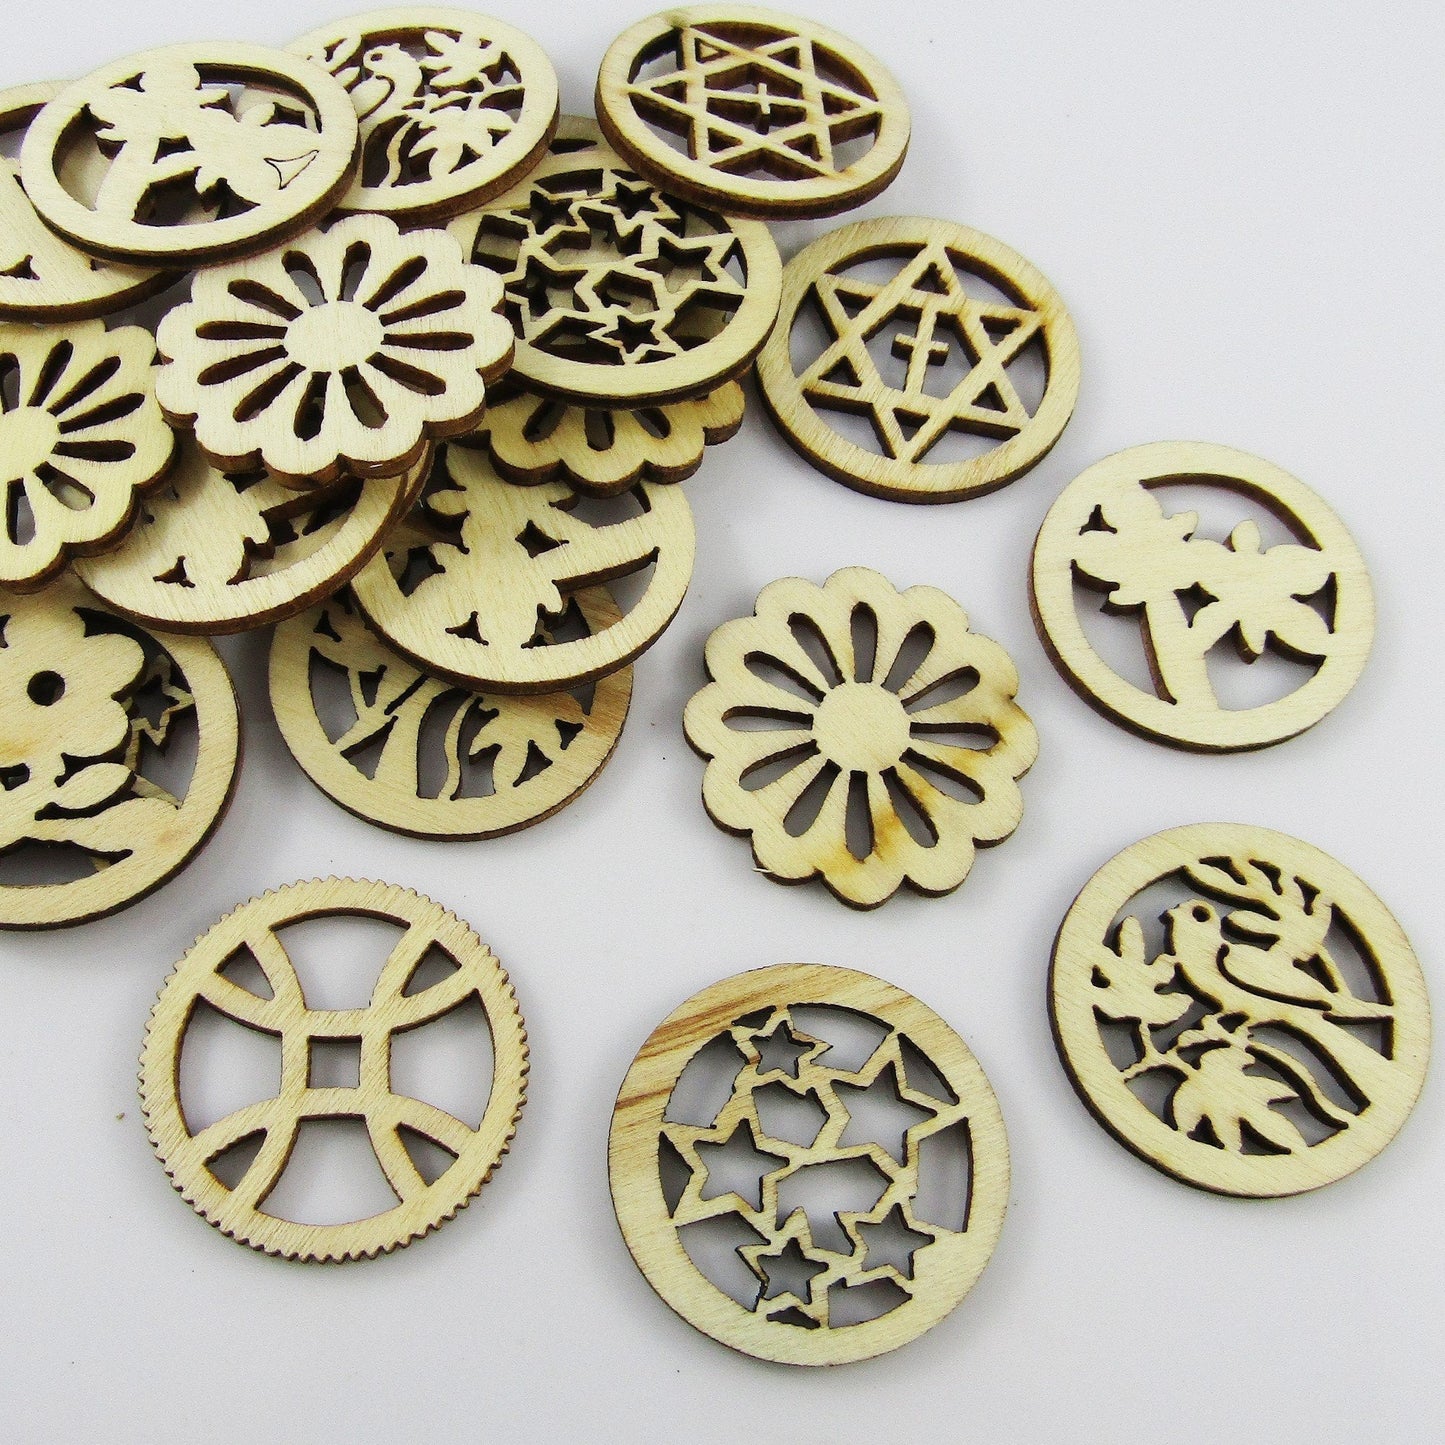 10pcs Laser Cut Wood Mixed Just Round Embellishment Scrapbooking Cards & More!